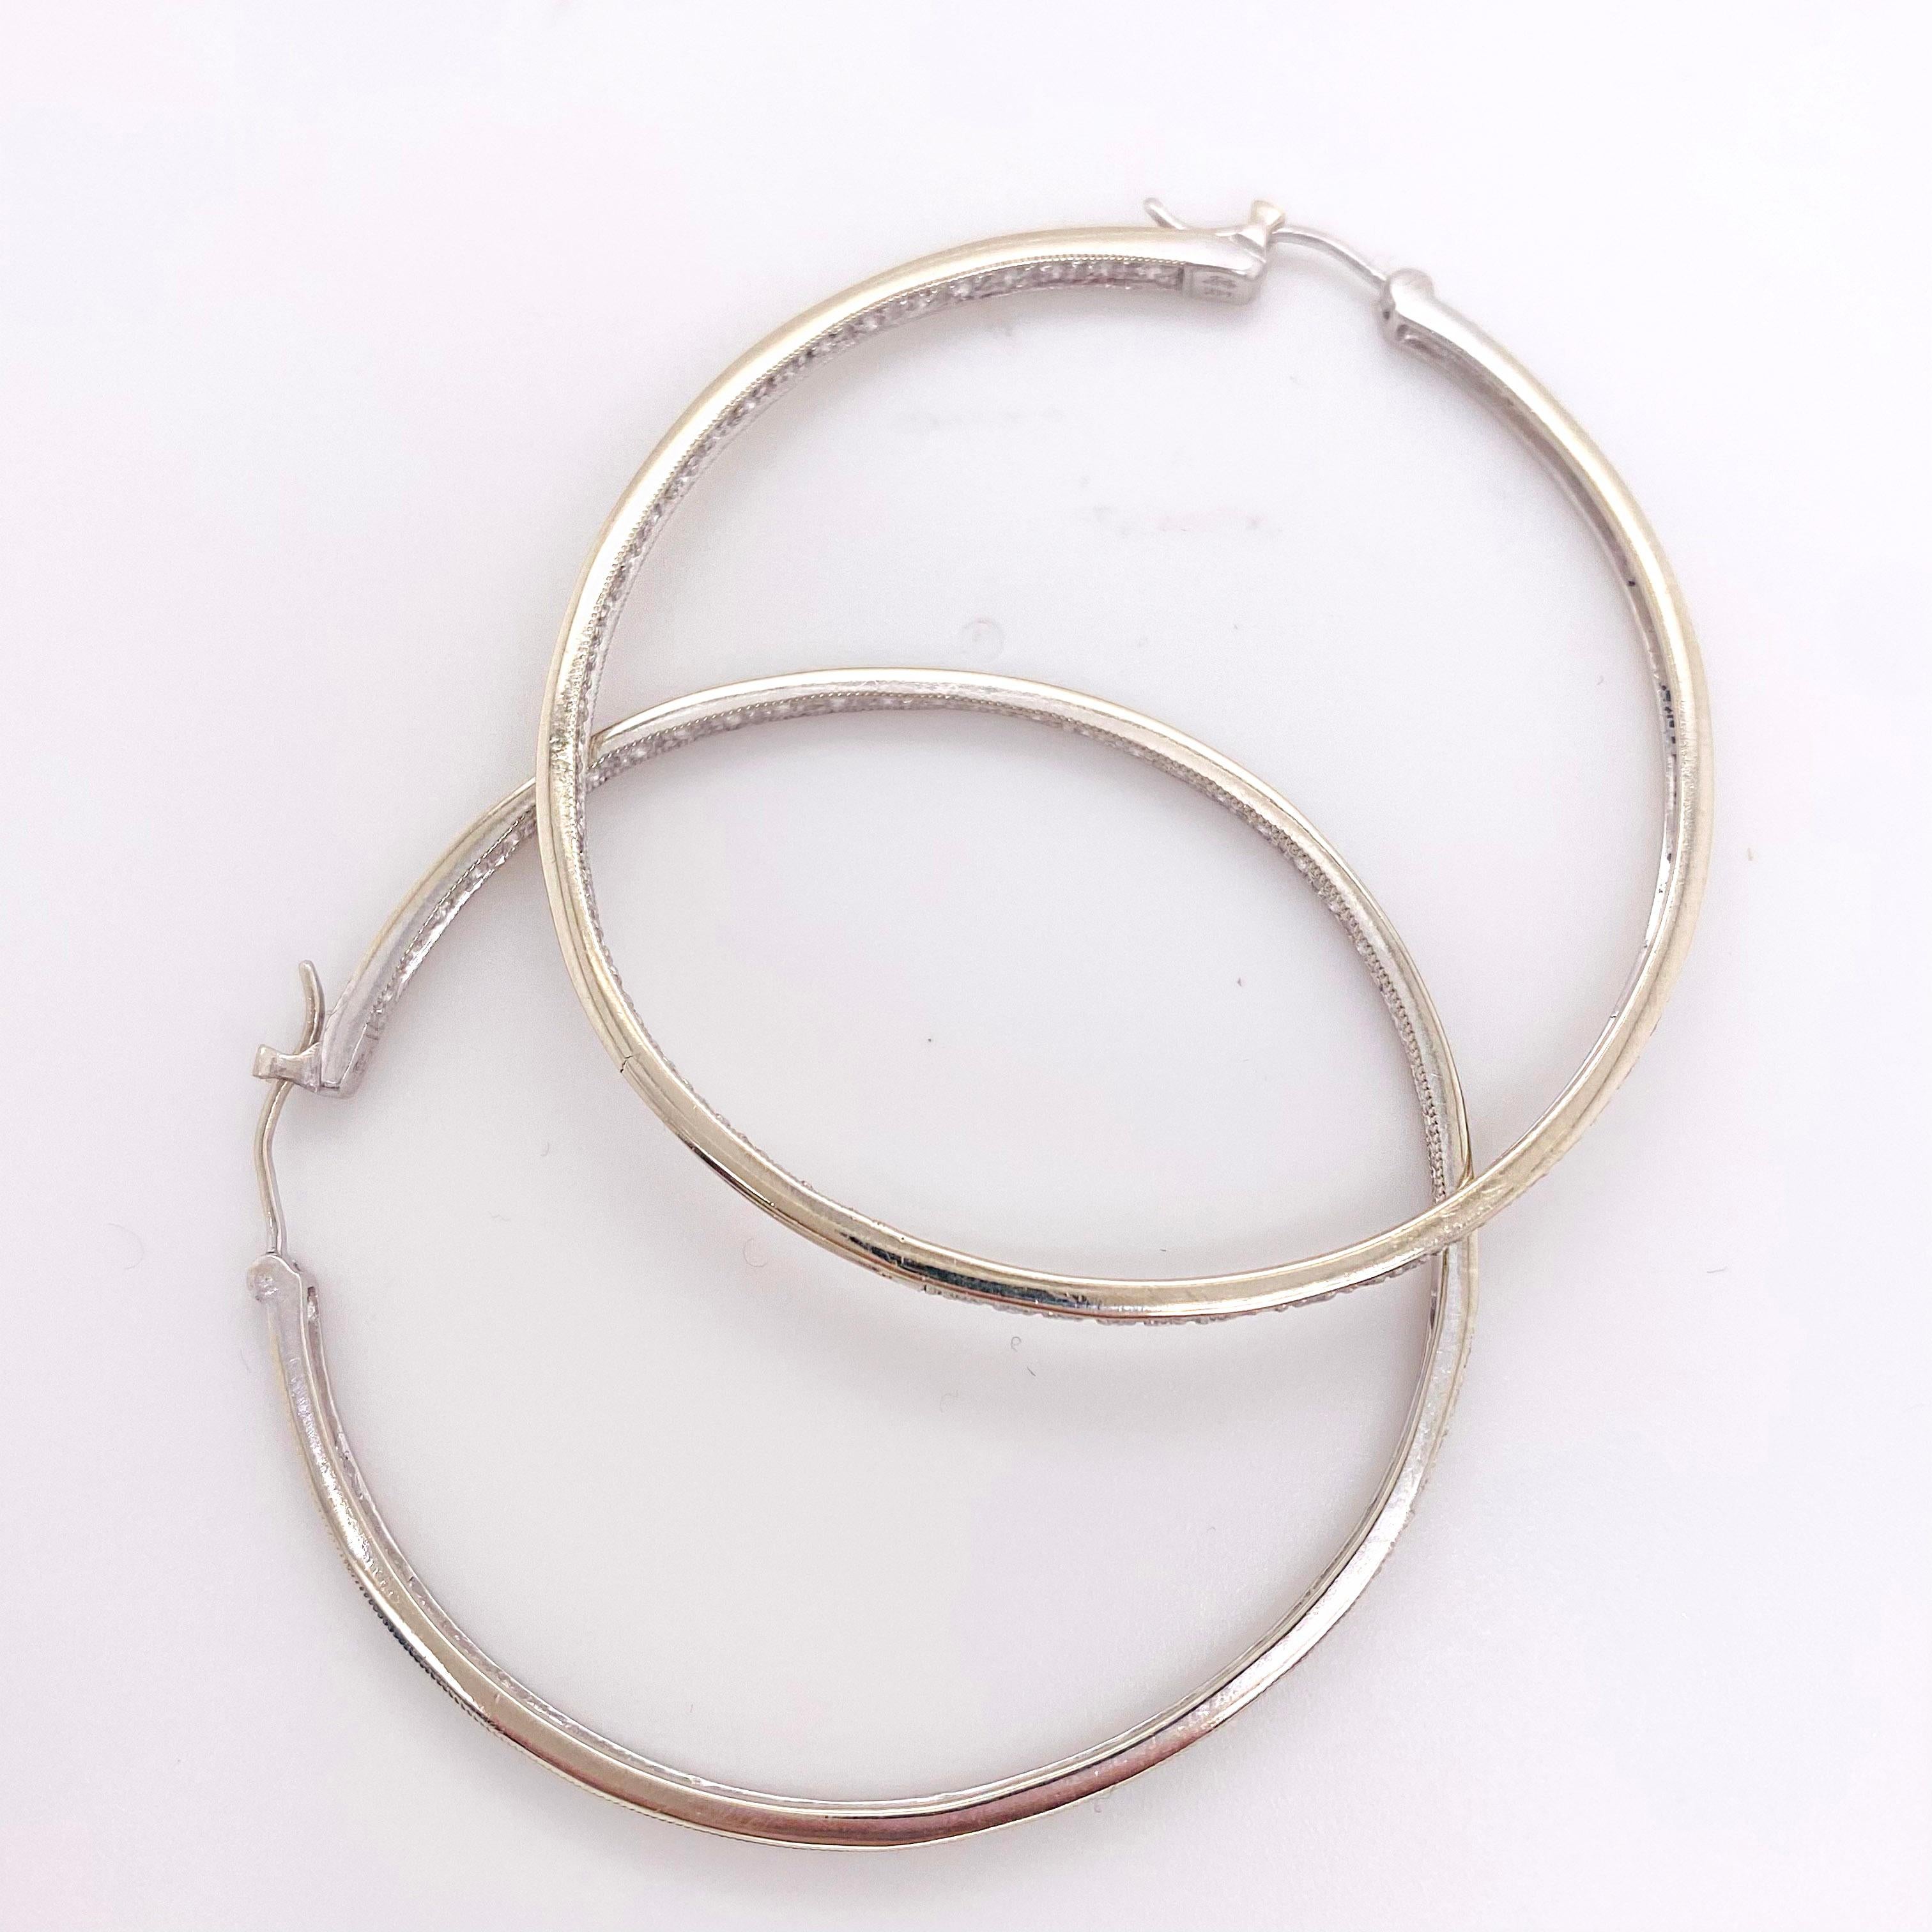 Contemporary Diamond Hoop Earrings, White Gold, Inside Out Hoops For Sale